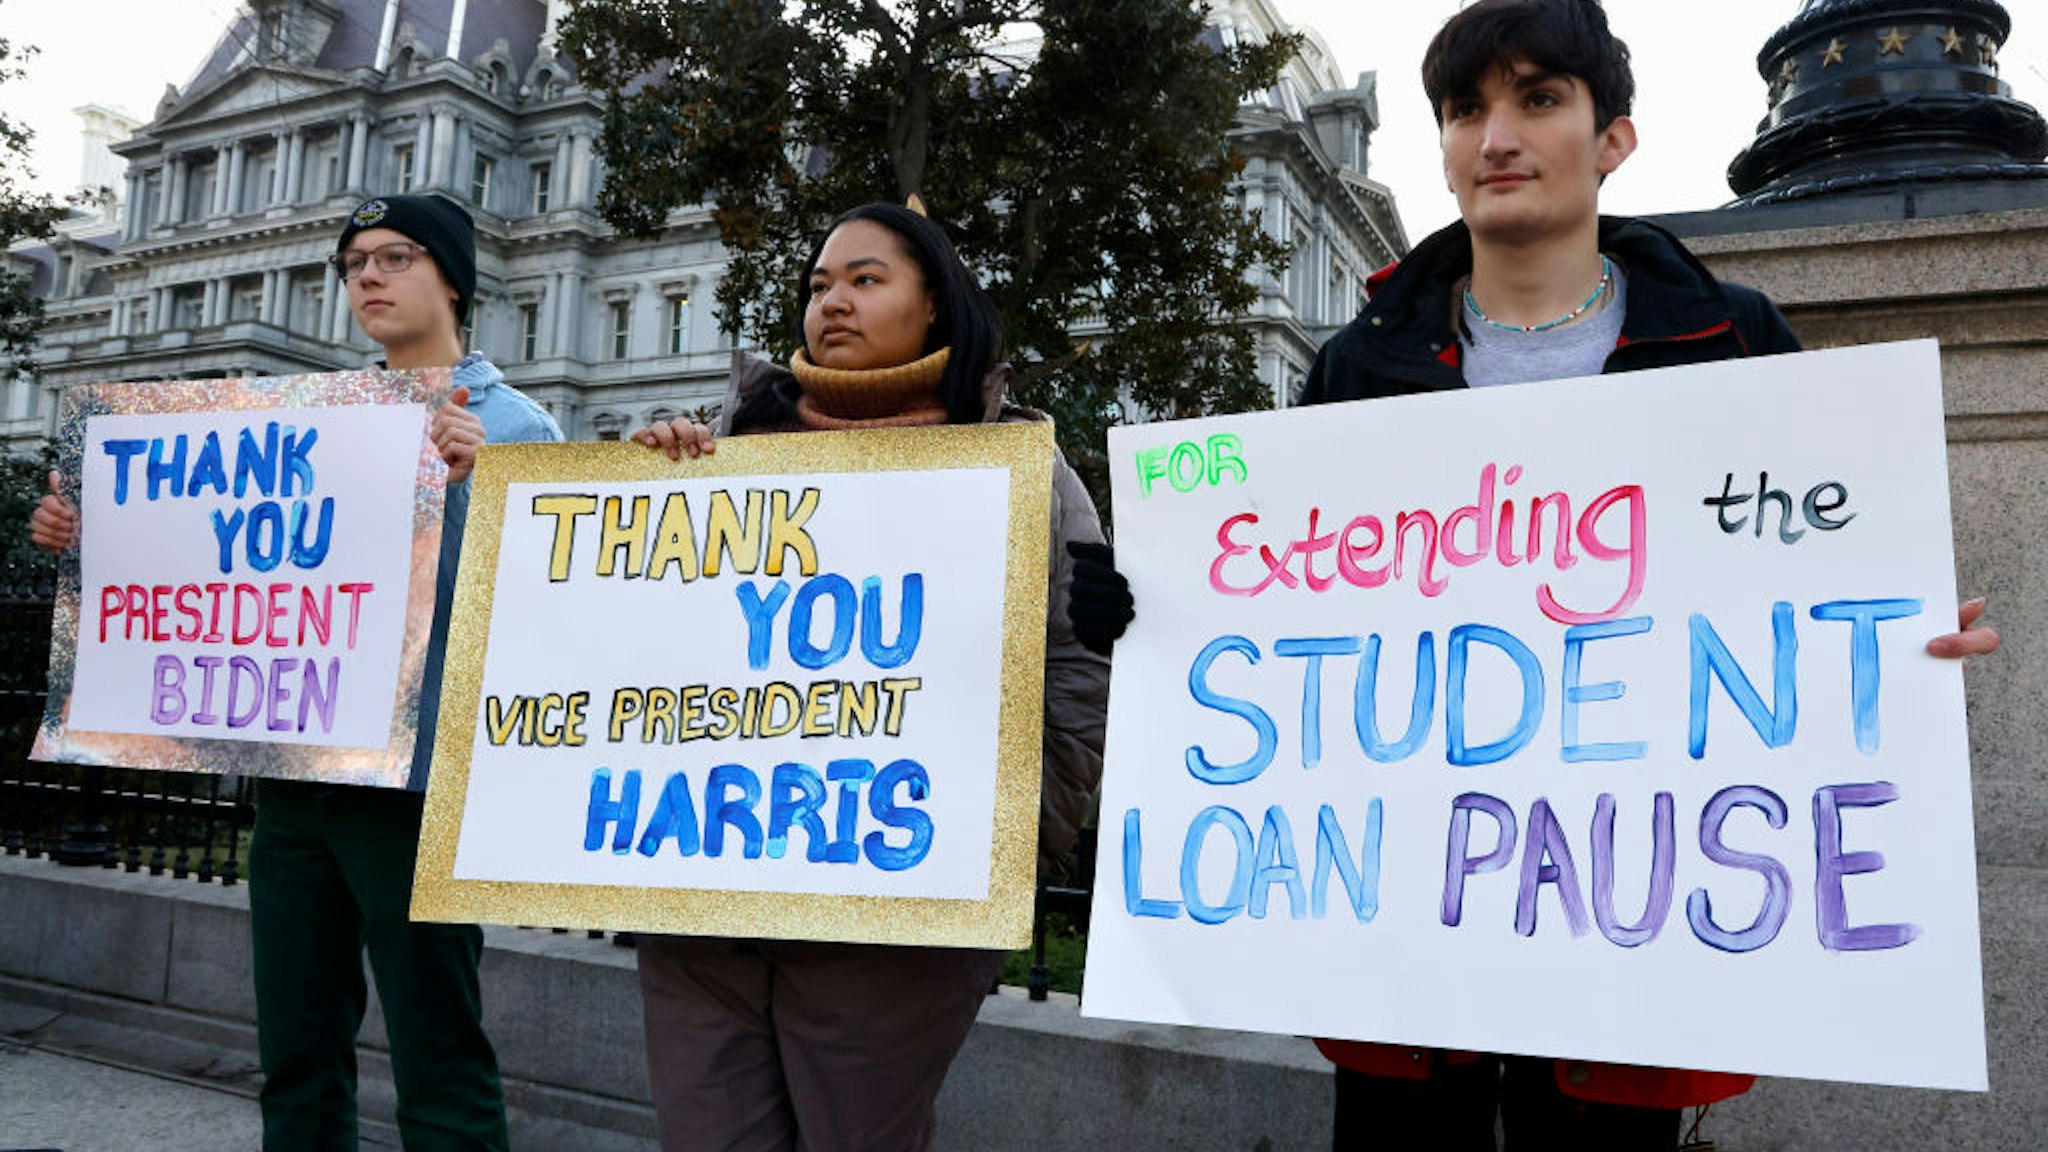 WASHINGTON, DC - JANUARY 13: Student loan borrowers and the Too Much Talent Band thank President Joe Biden and Vice President Kamala Harris for extending the student loan pause and now demand that they cancel student debt at a gathering outside The White House on January 13, 2022 in Washington, DC. (Photo by Paul Morigi/Getty Images for We, The 45 Million)